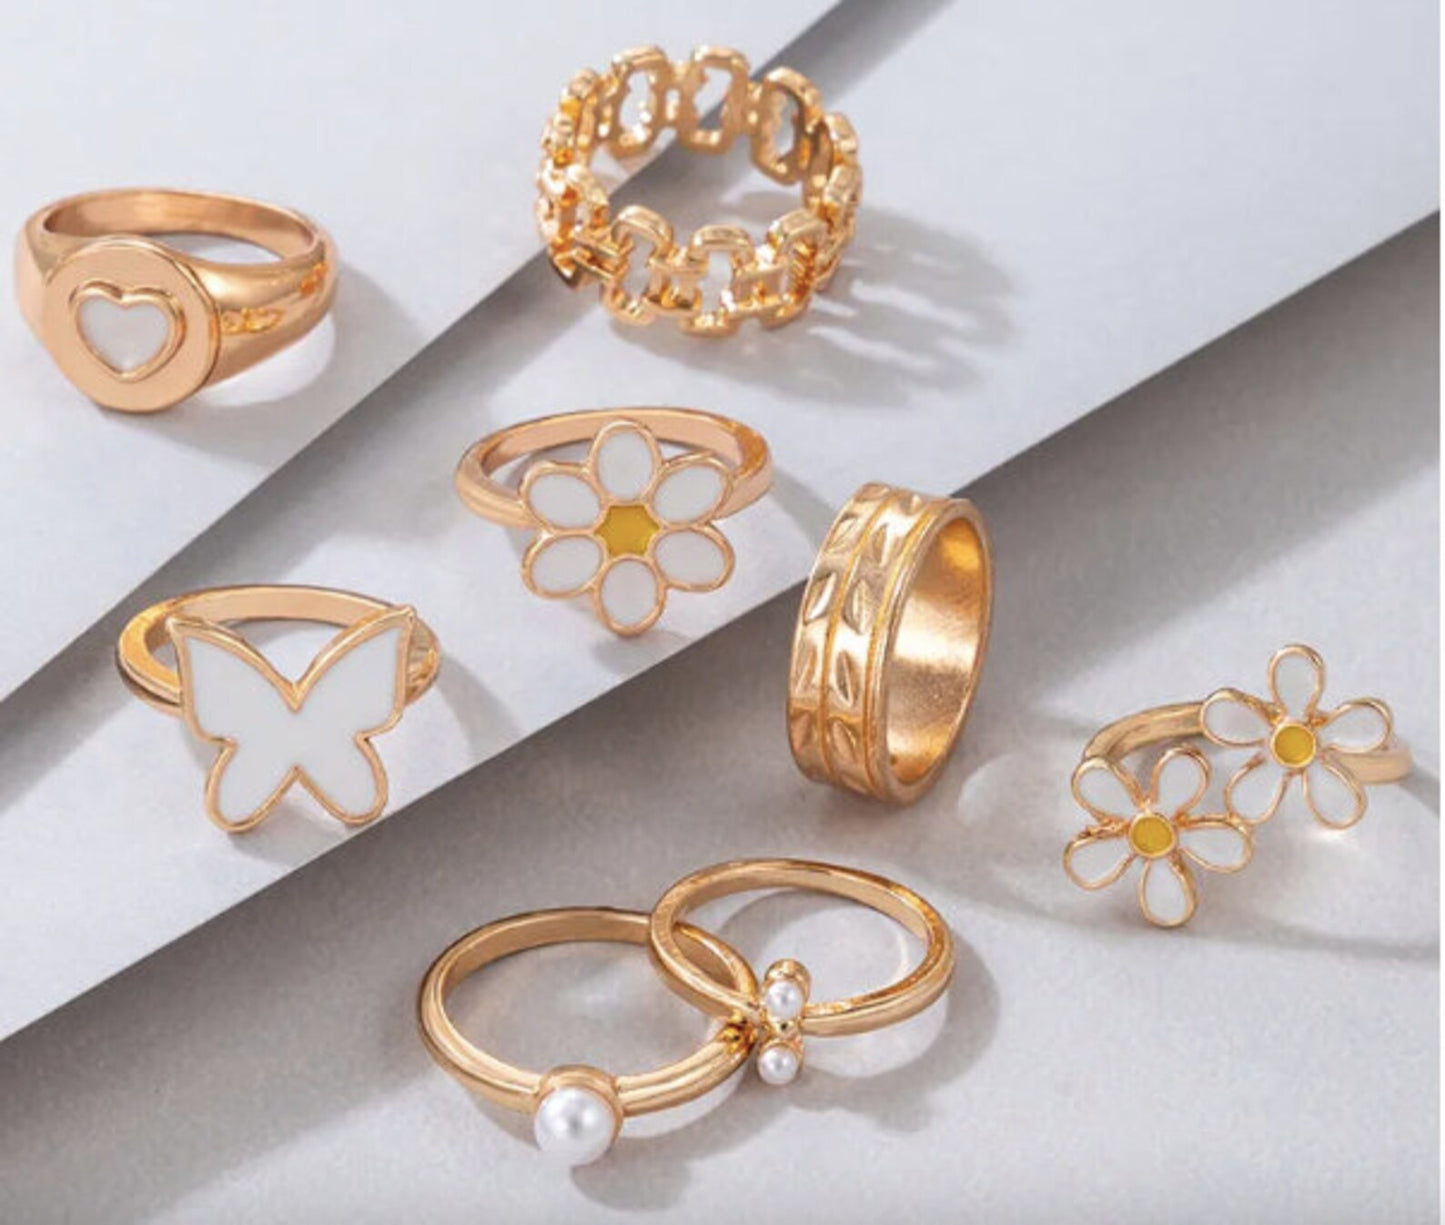 Floral Set of Gold and White Rings